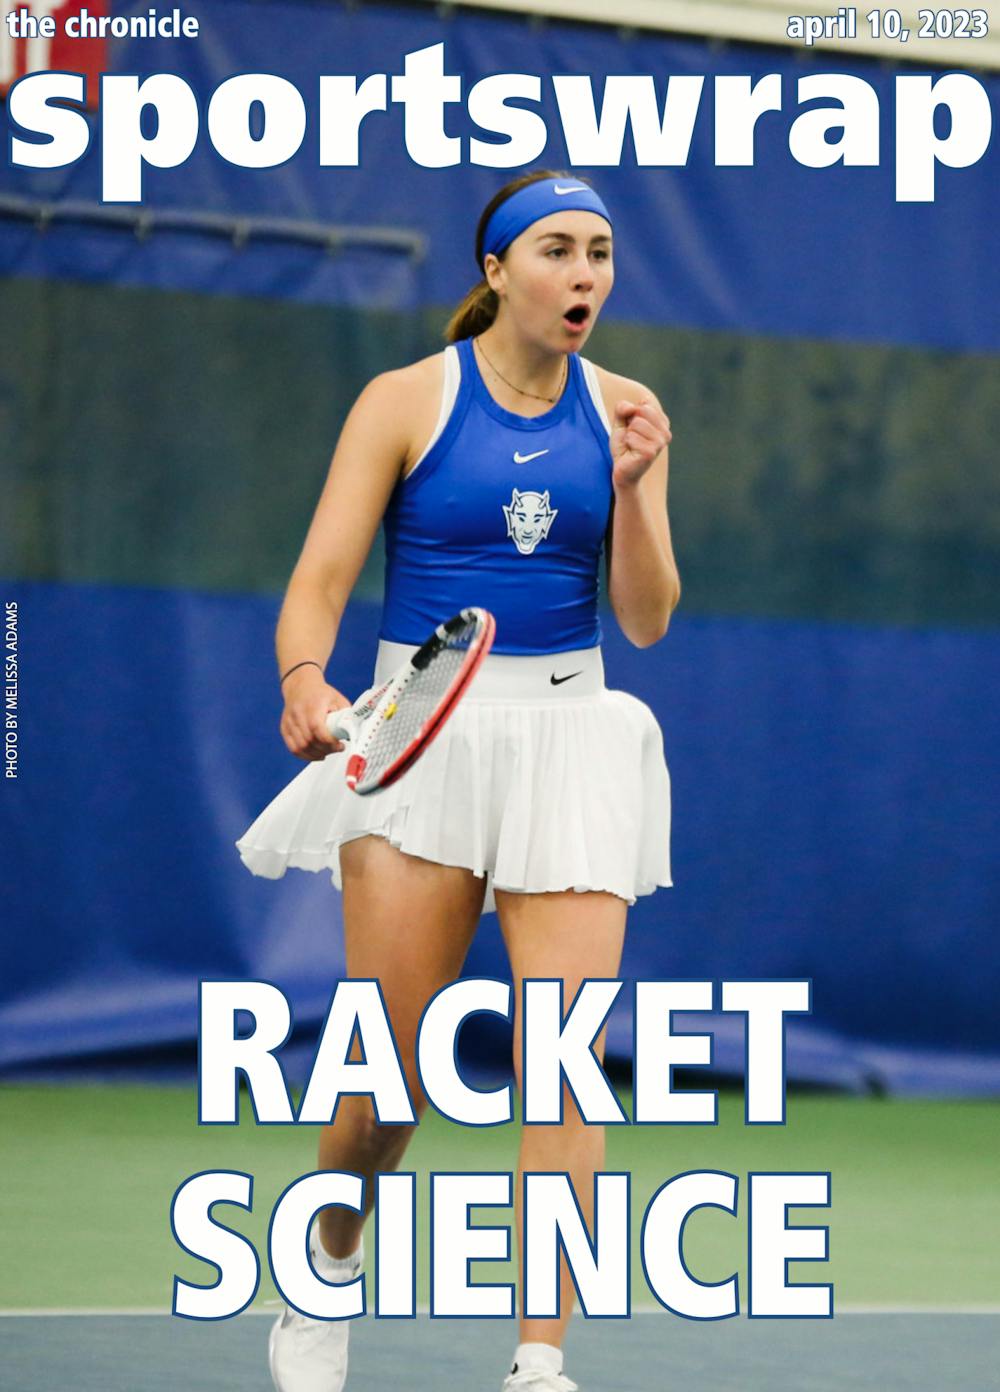 Duke women's tennis knocked off Wake Forest and N.C. State over the weekend.